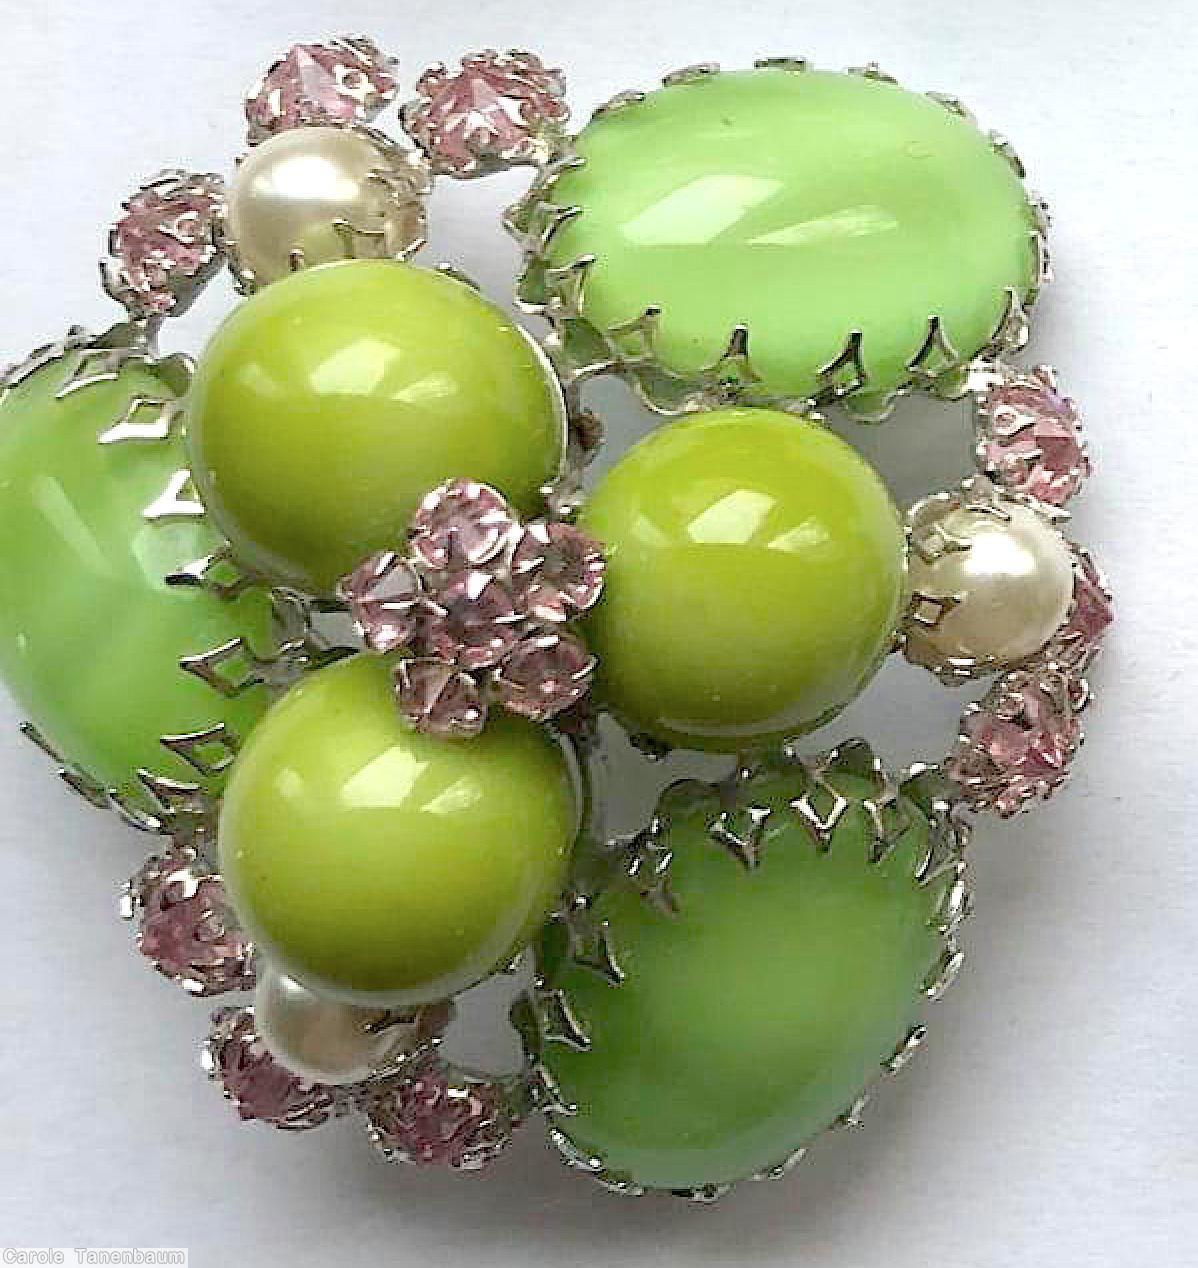 Schreiner swirled triangle pin 3 round cab 3 oval cab clustered flower center lime green round globe apple green moonglow large oval ice pink chaton faux pearl silvertone jewelry